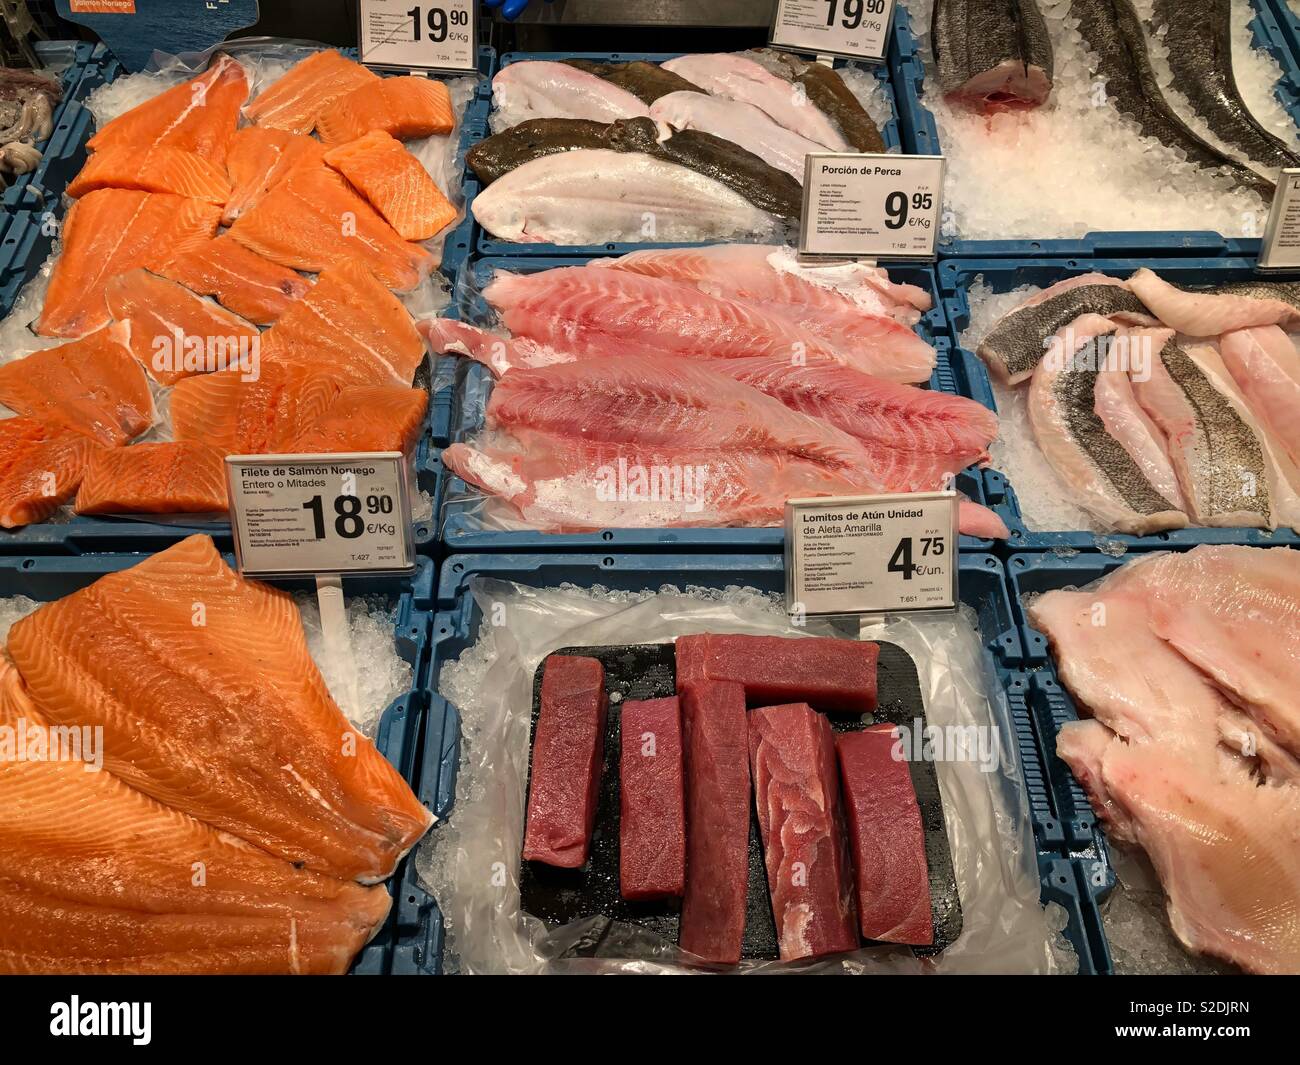 Fresh fish stall in a supermarket, Spain Stock Photo